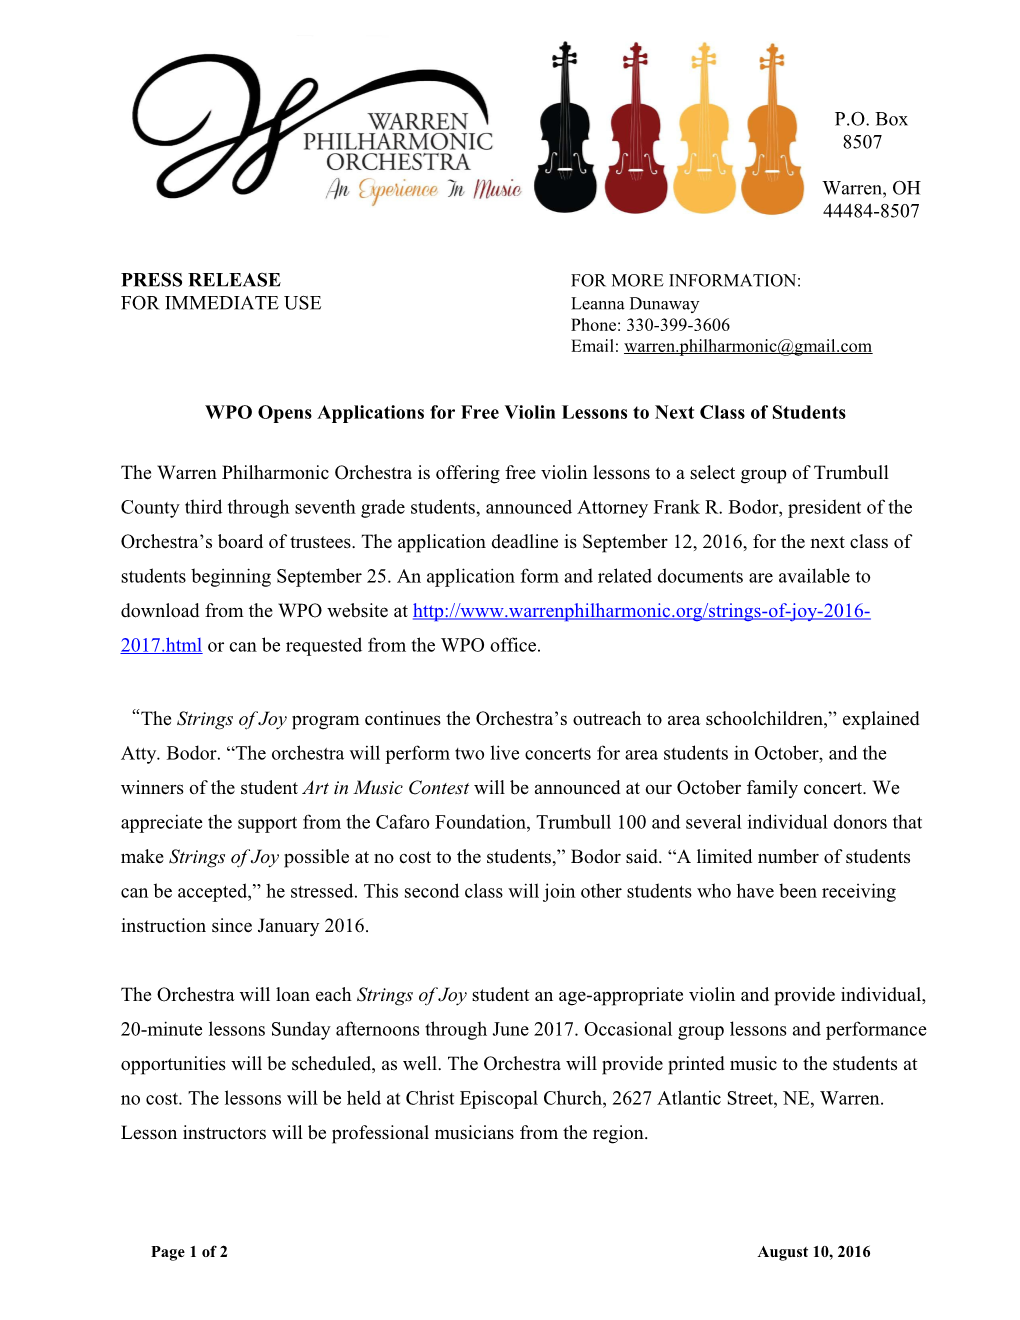 WPO Press Release: WPO Opens Applications for Free Violin Lessons to Next Class of Students